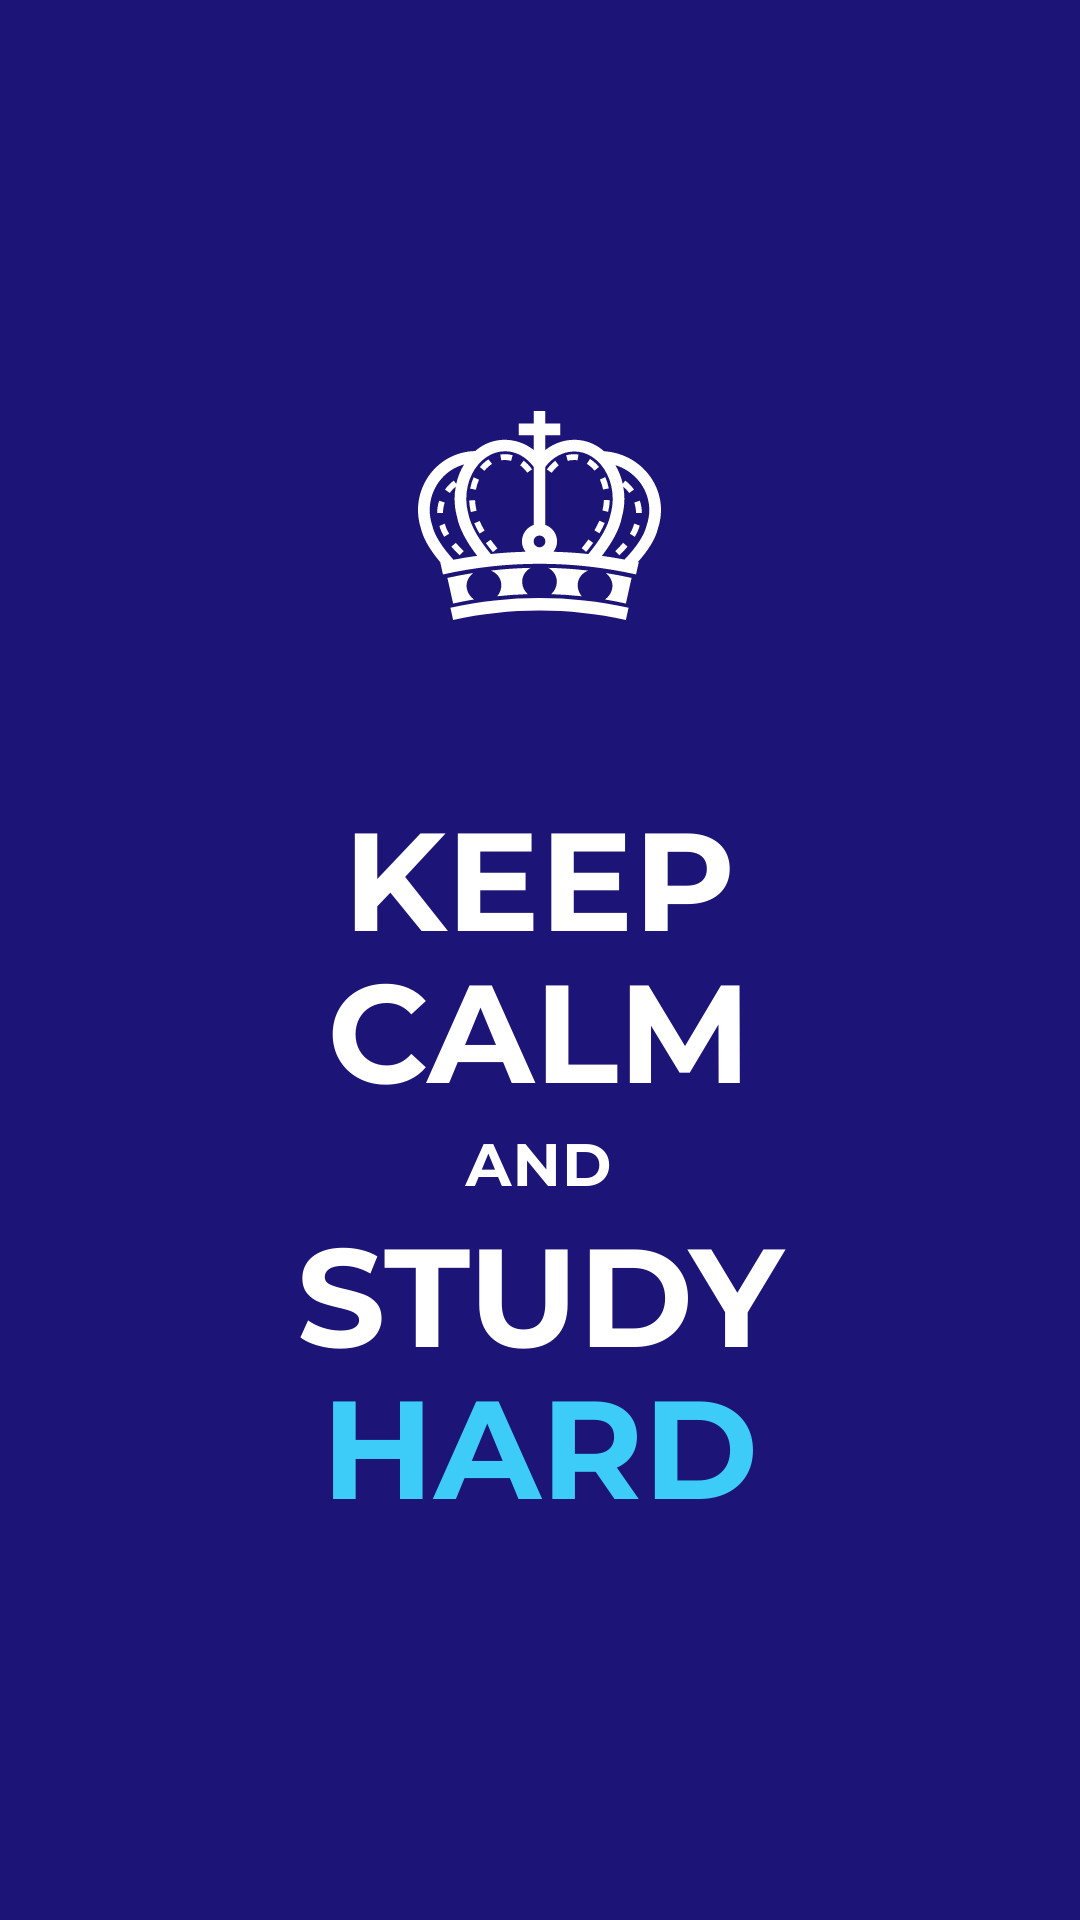 Keep Calm and Study Hard Facebook Sponsored Message 1200x628